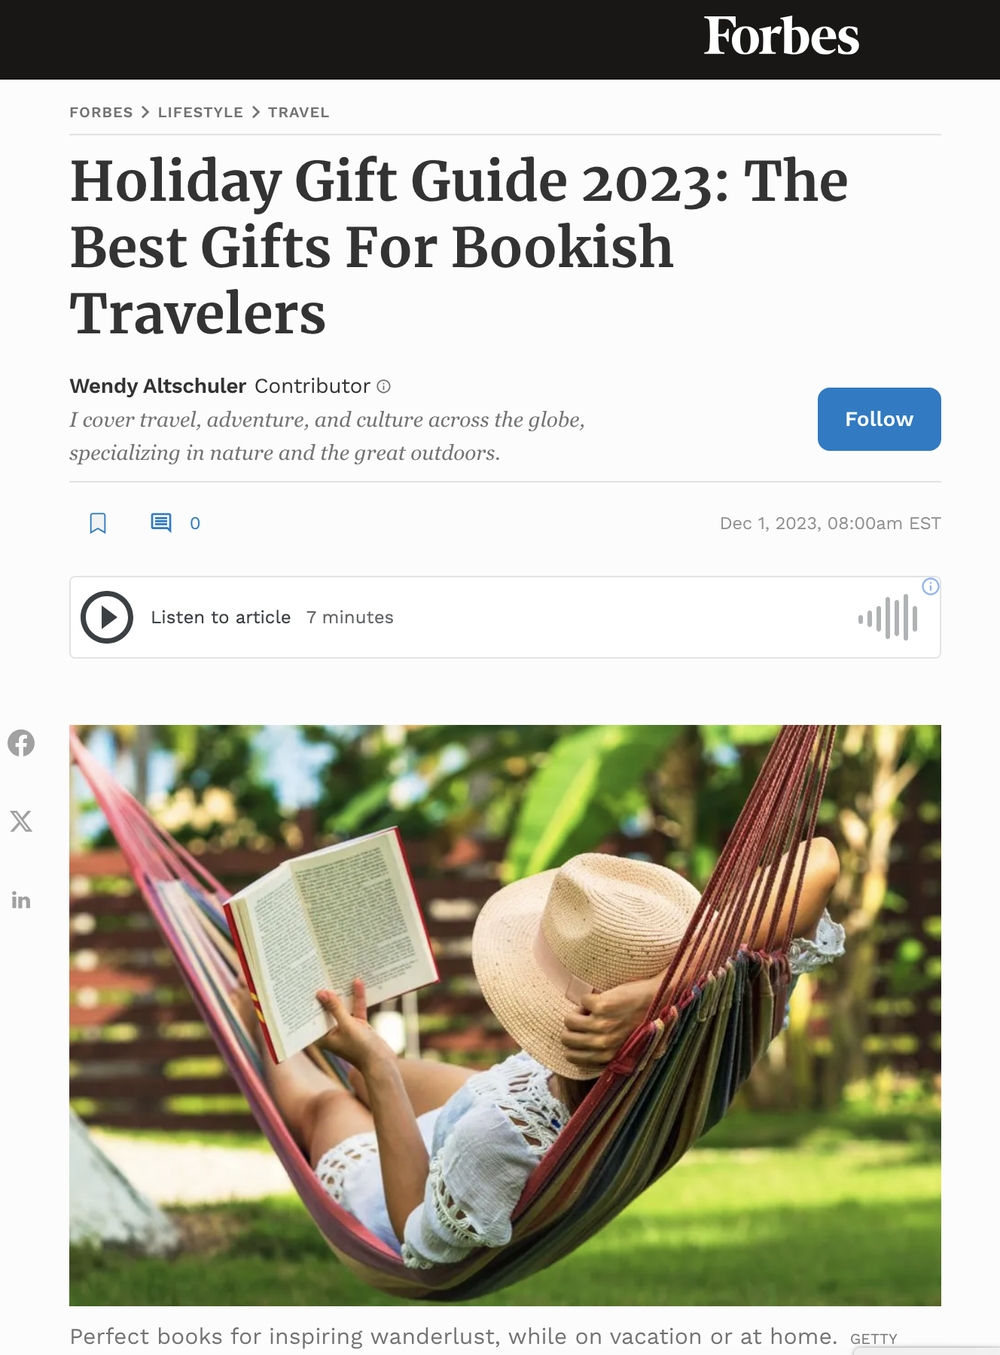 Holiday Gift Guide 2023: The Best Gifts For Bookish Travelers